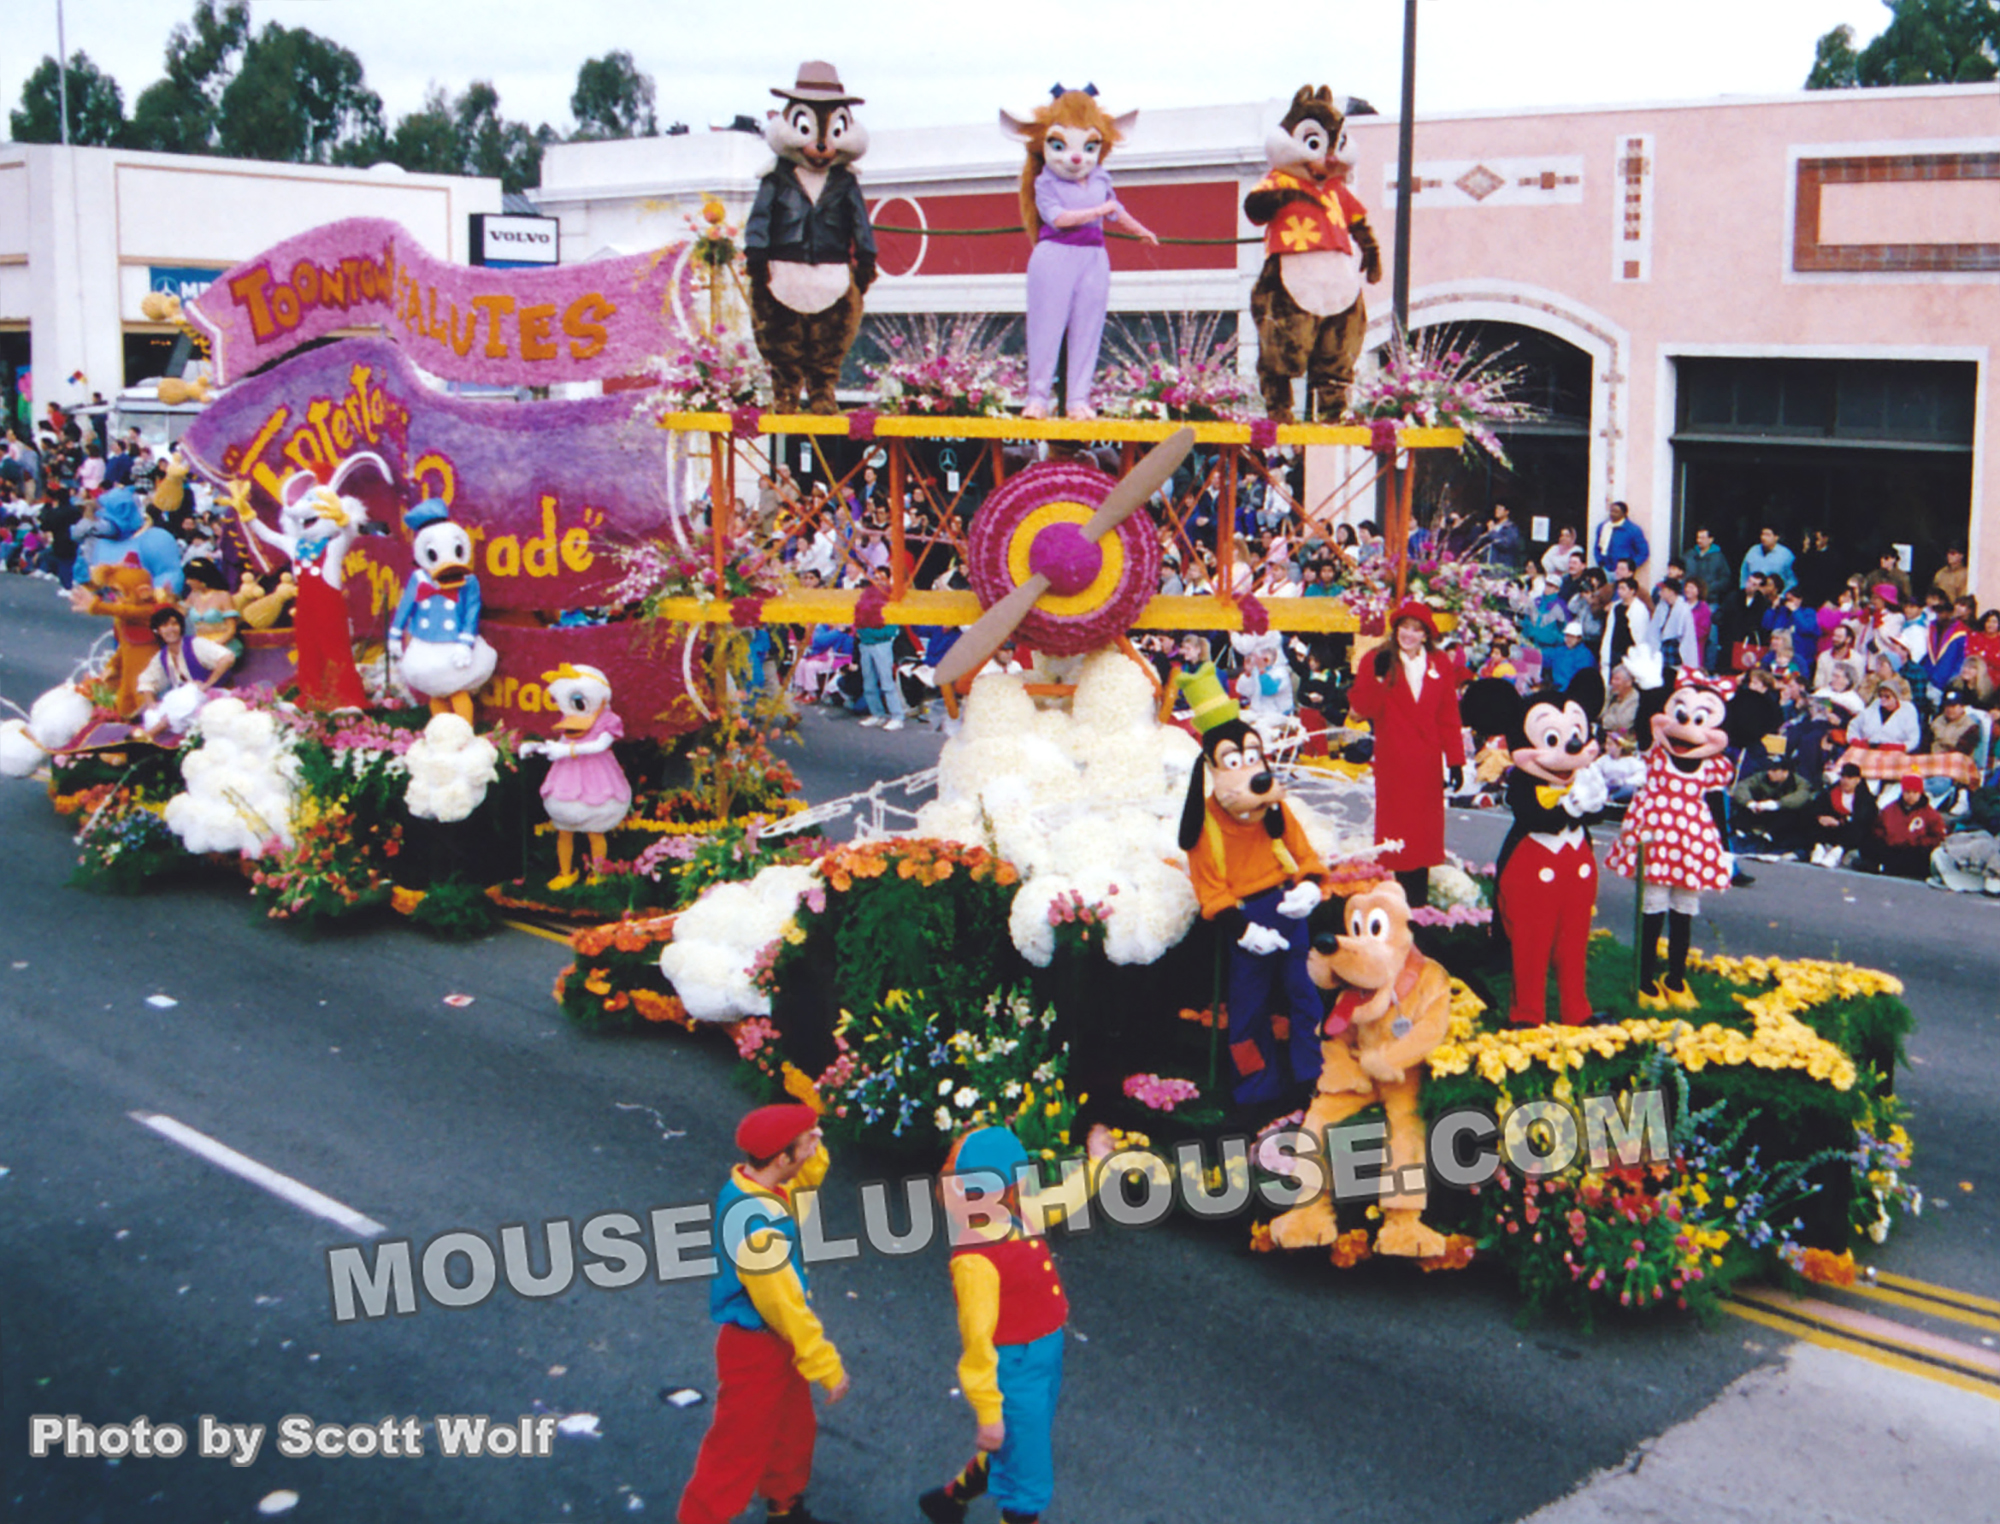 Chip, Gadget, Dale and other Disney character on board a unit in the pre-show of the 1993 Tournament of Roses parade